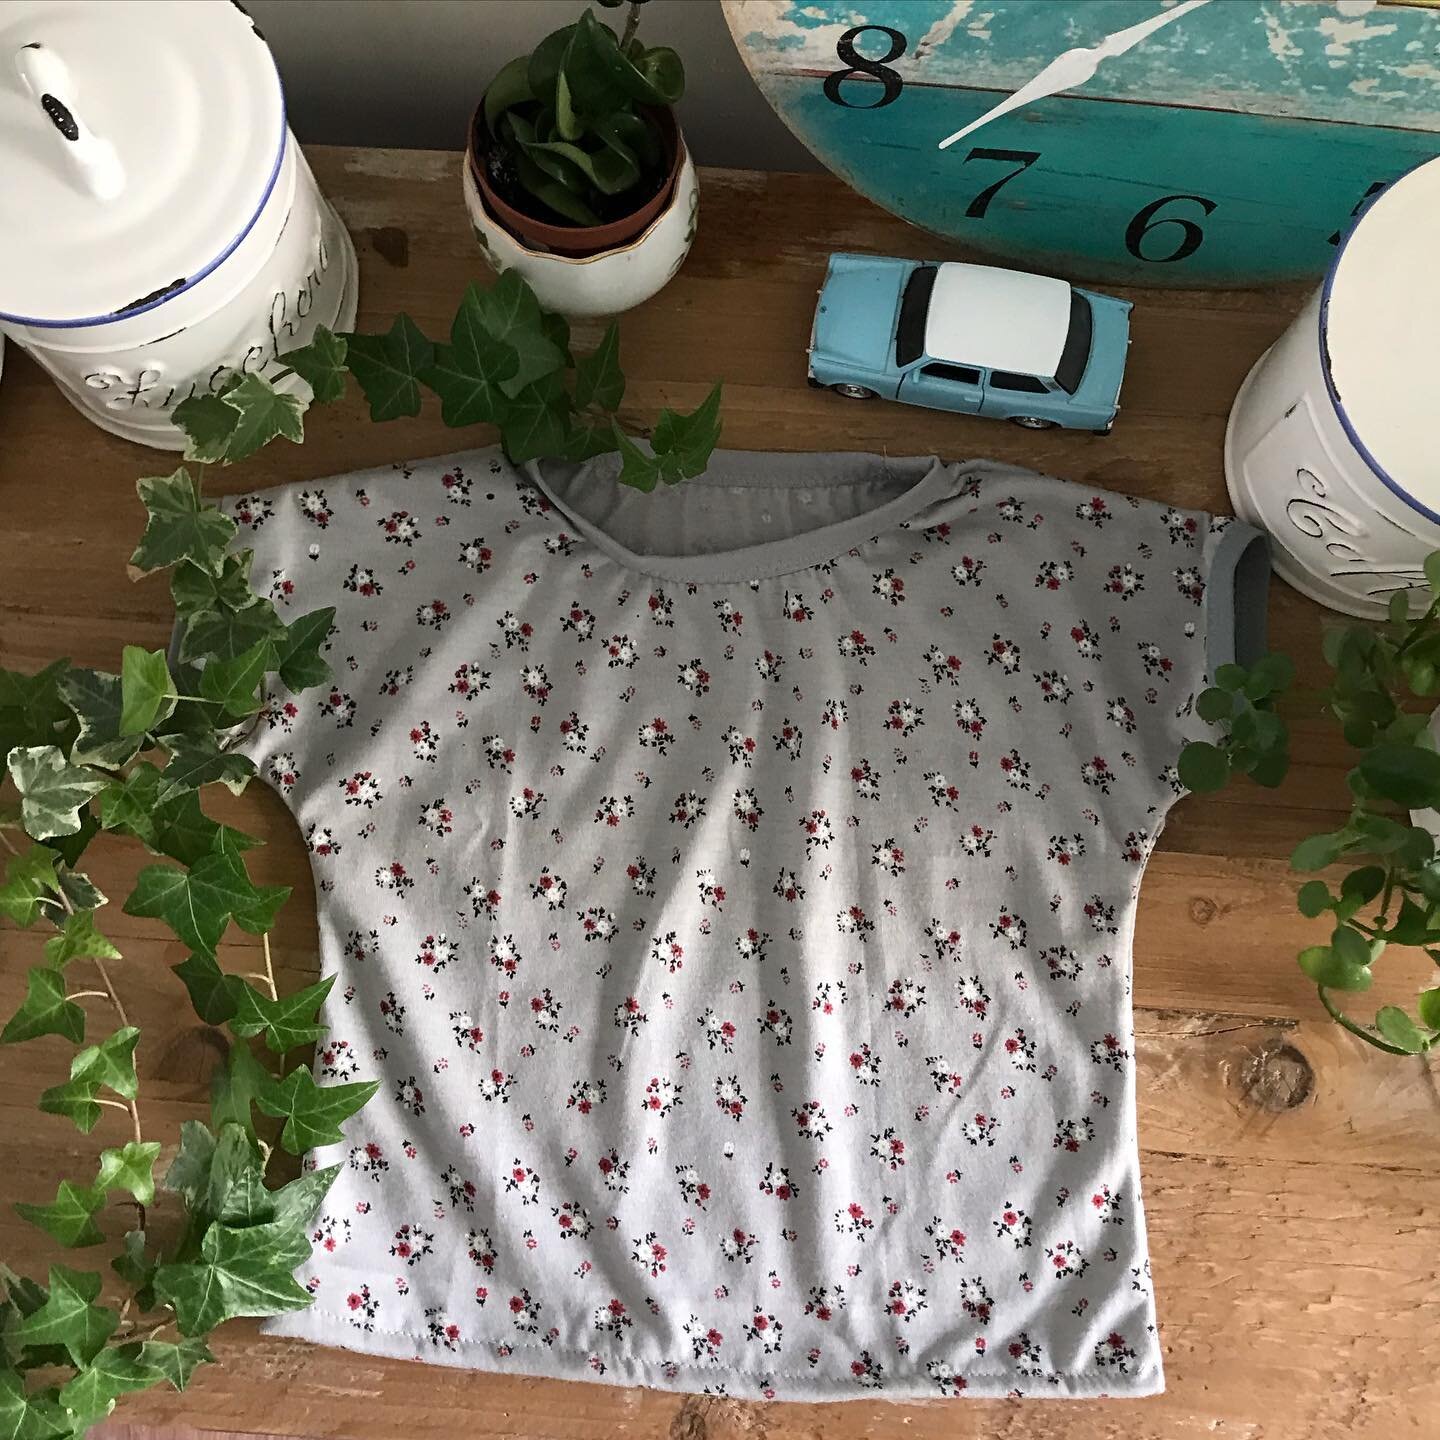 Working on a quick and easy pattern for a simple T-Shirt. Now I just have to find out what size this will be so I can start the grading. 

#baby #toddler #tshirt #floral #pattern #flowers #simple #fun #easy #quick #gift #homemade #handmade #memade #s